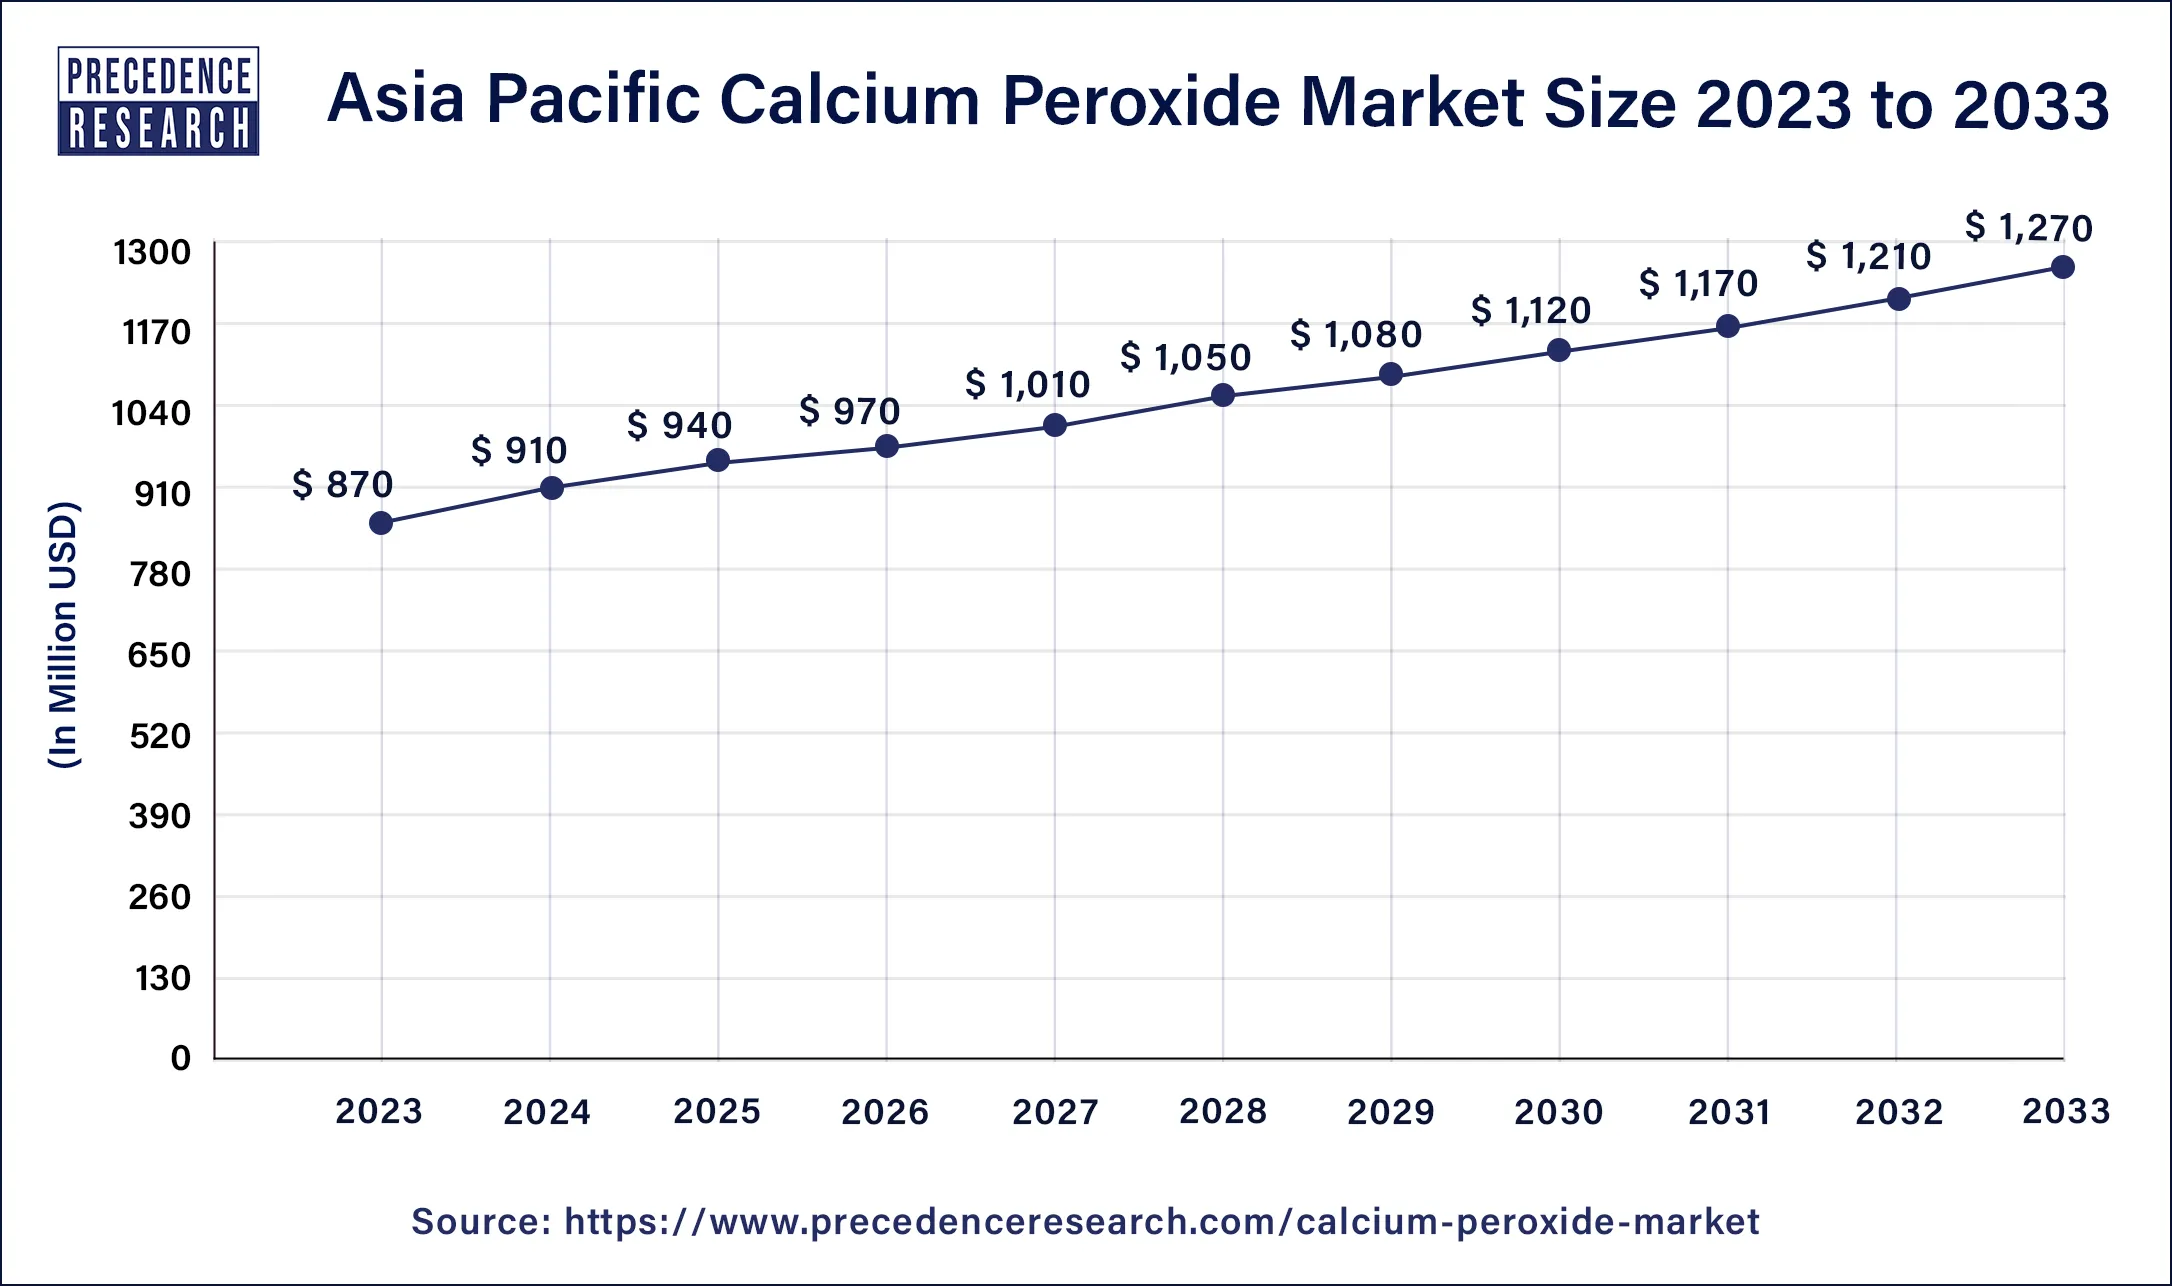 Asia Pacific Calcium Peroxide Market Size 2024 to 2033 